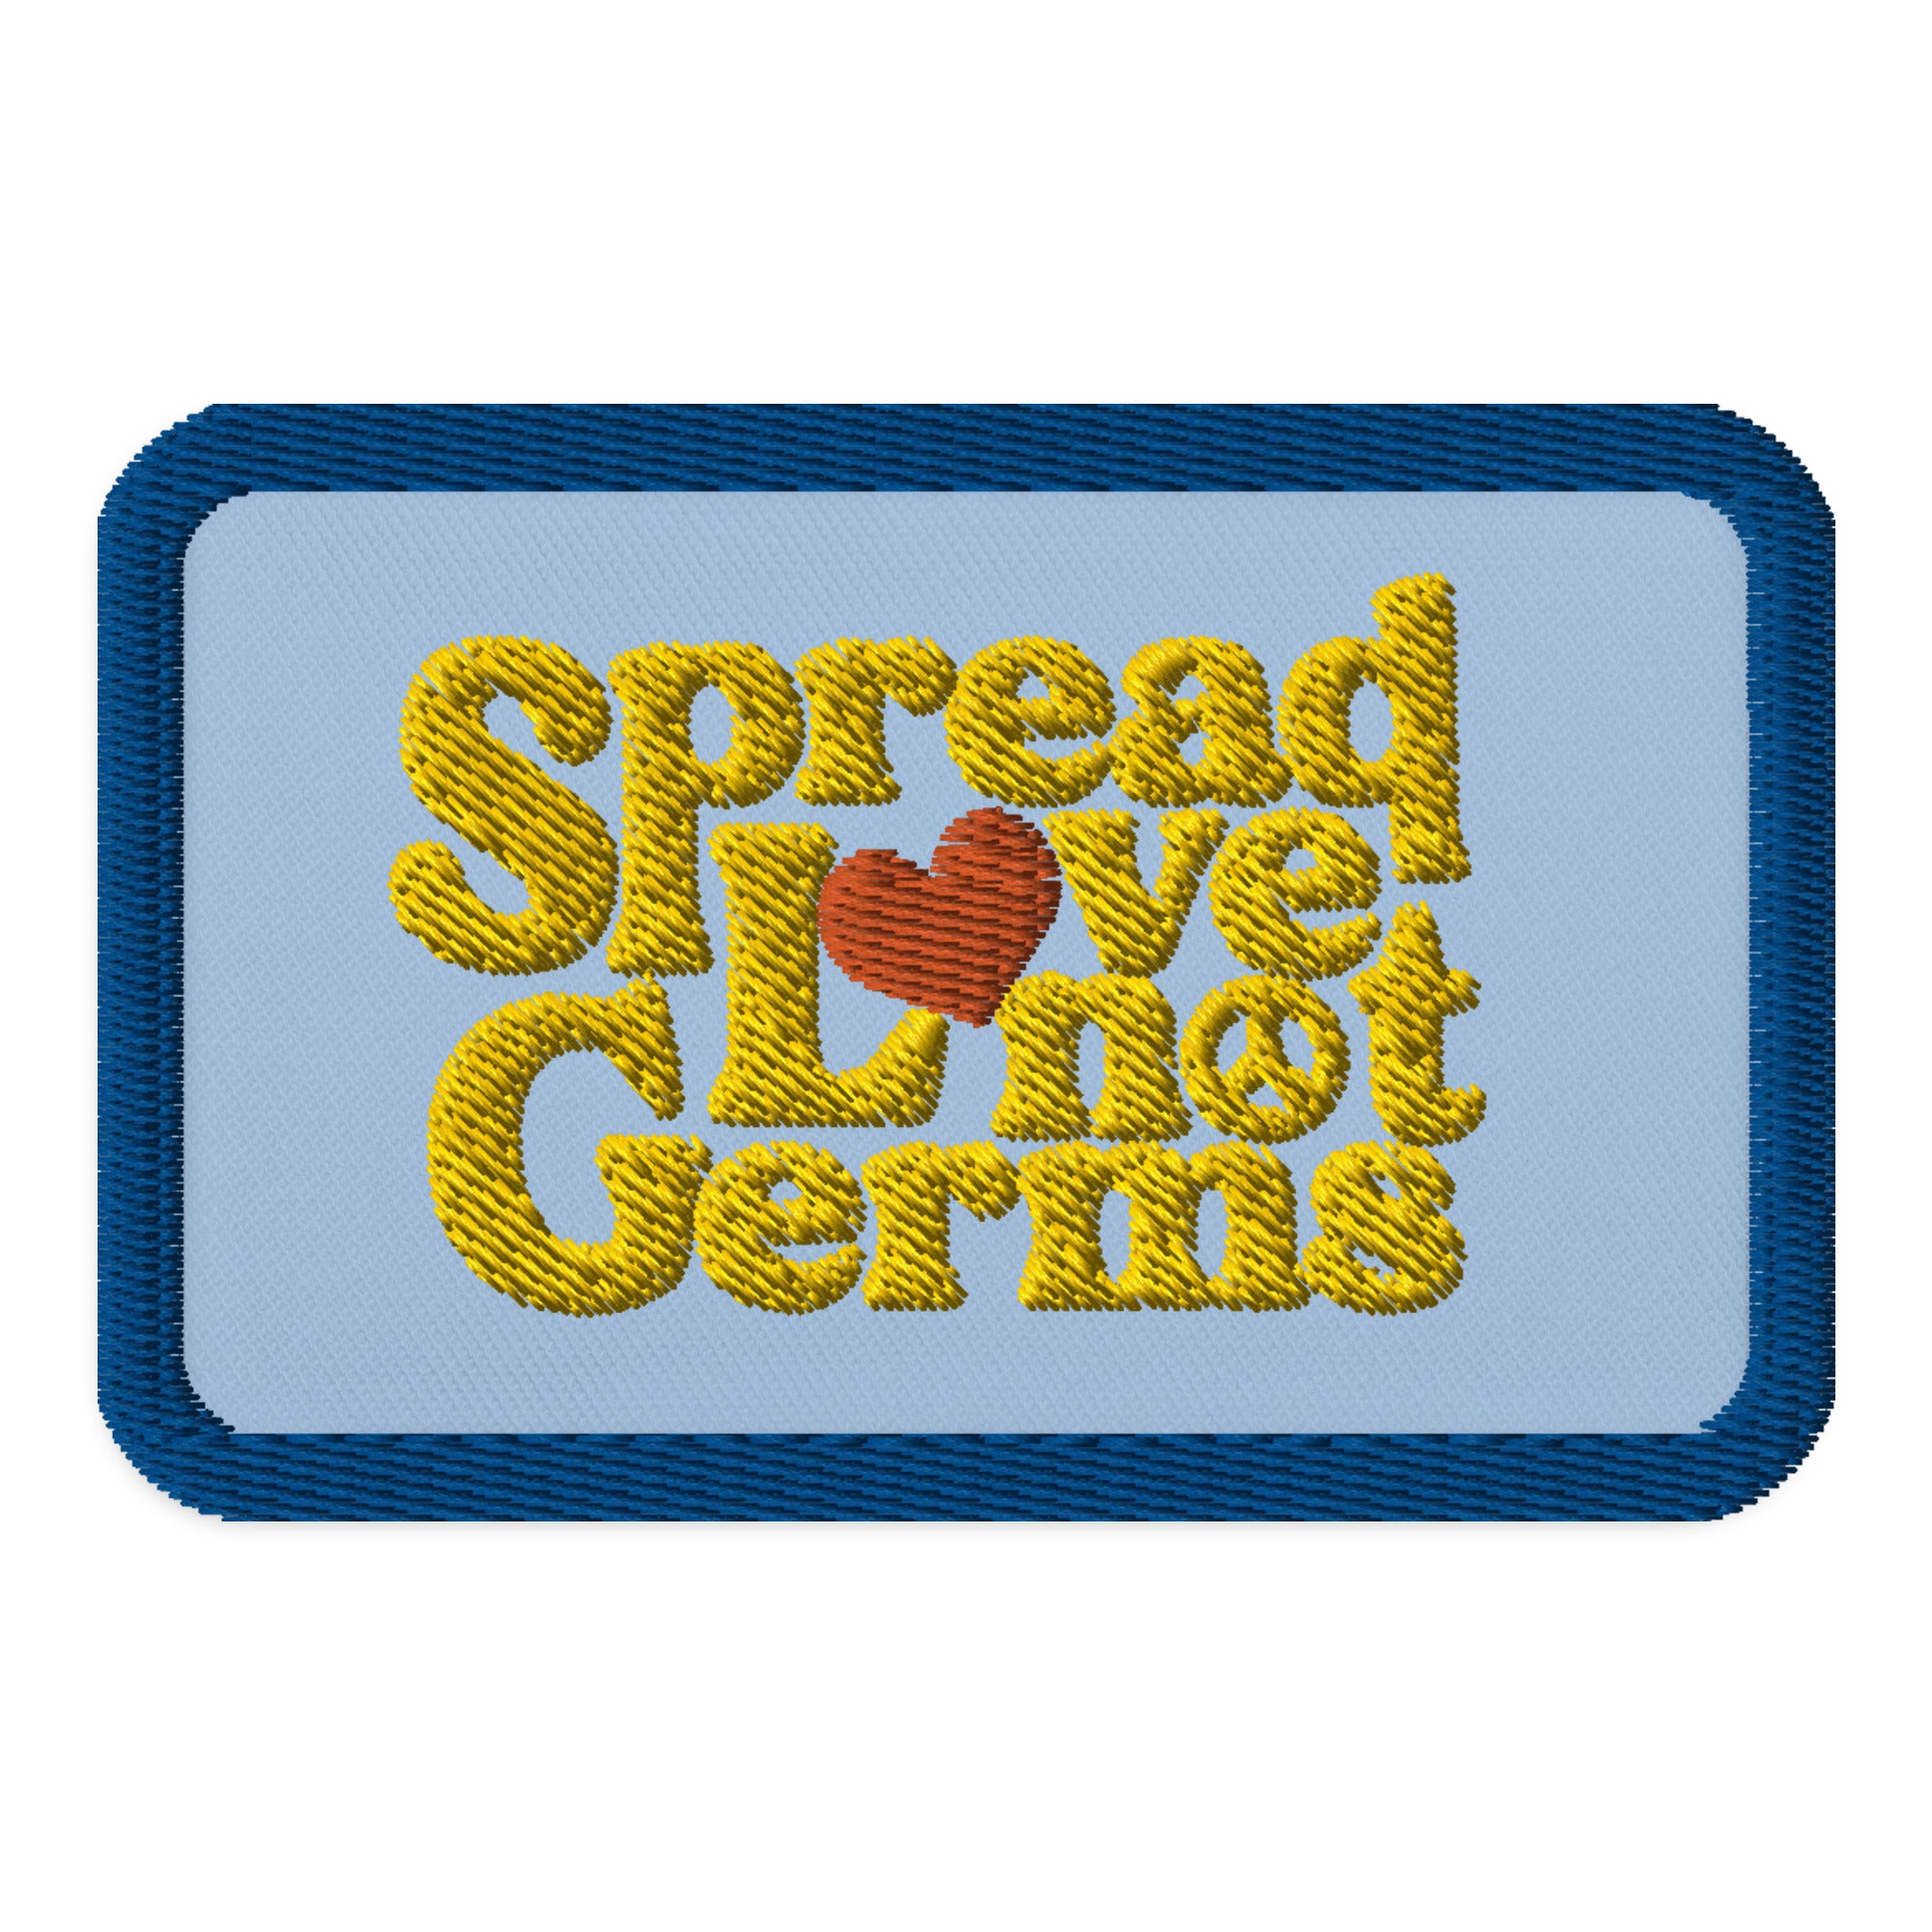 Spread Love, Not Germs Patch